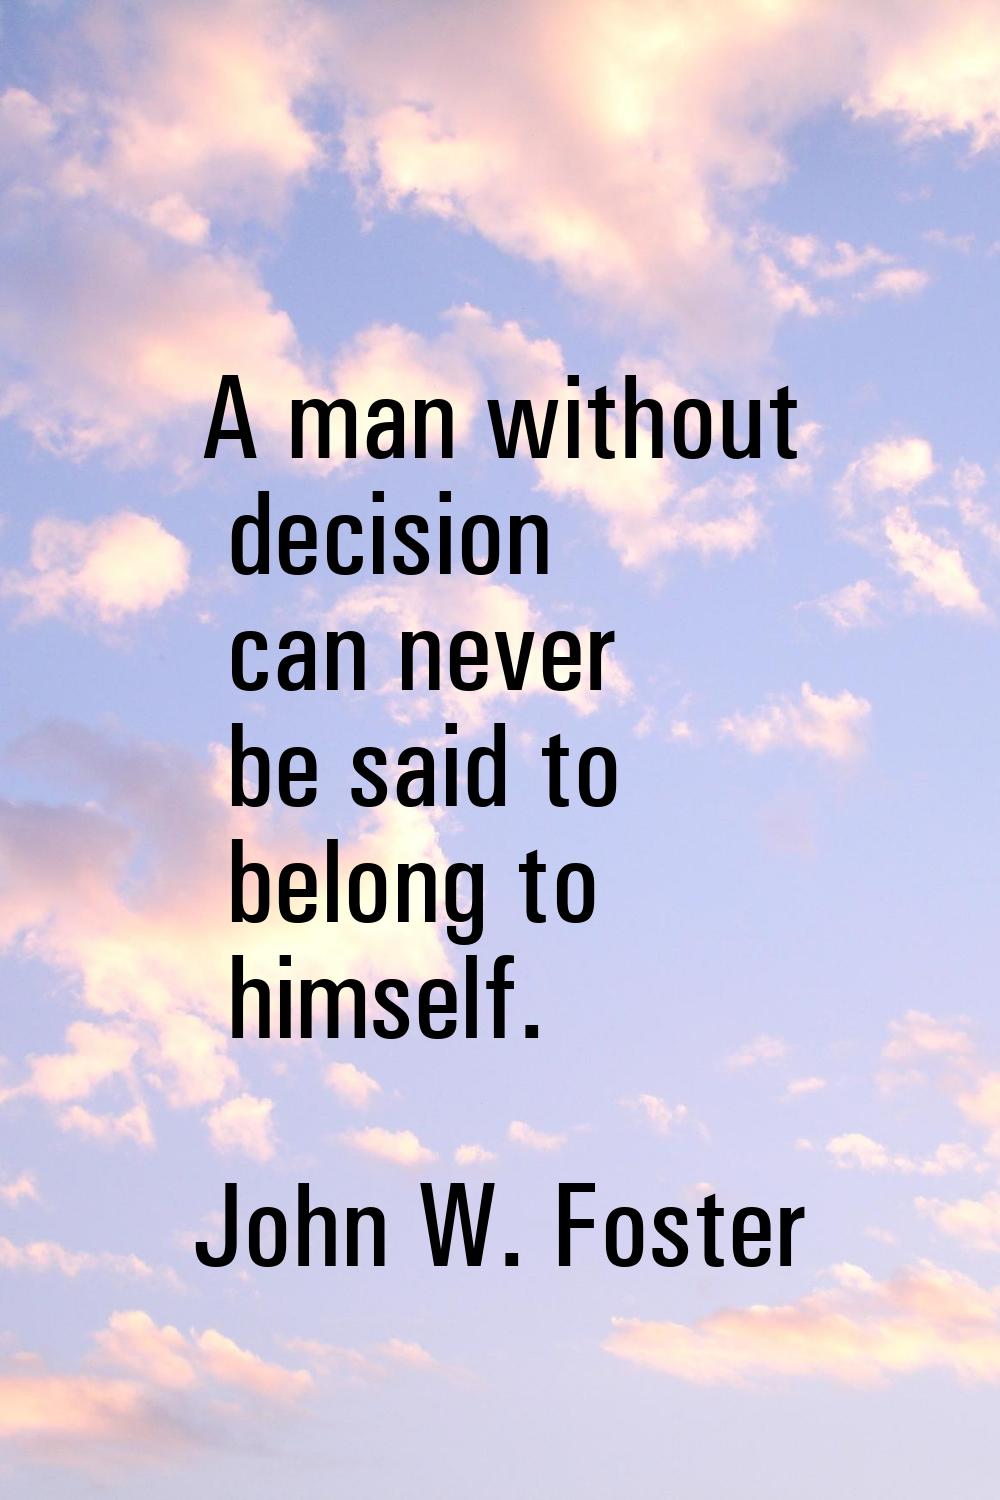 A man without decision can never be said to belong to himself.